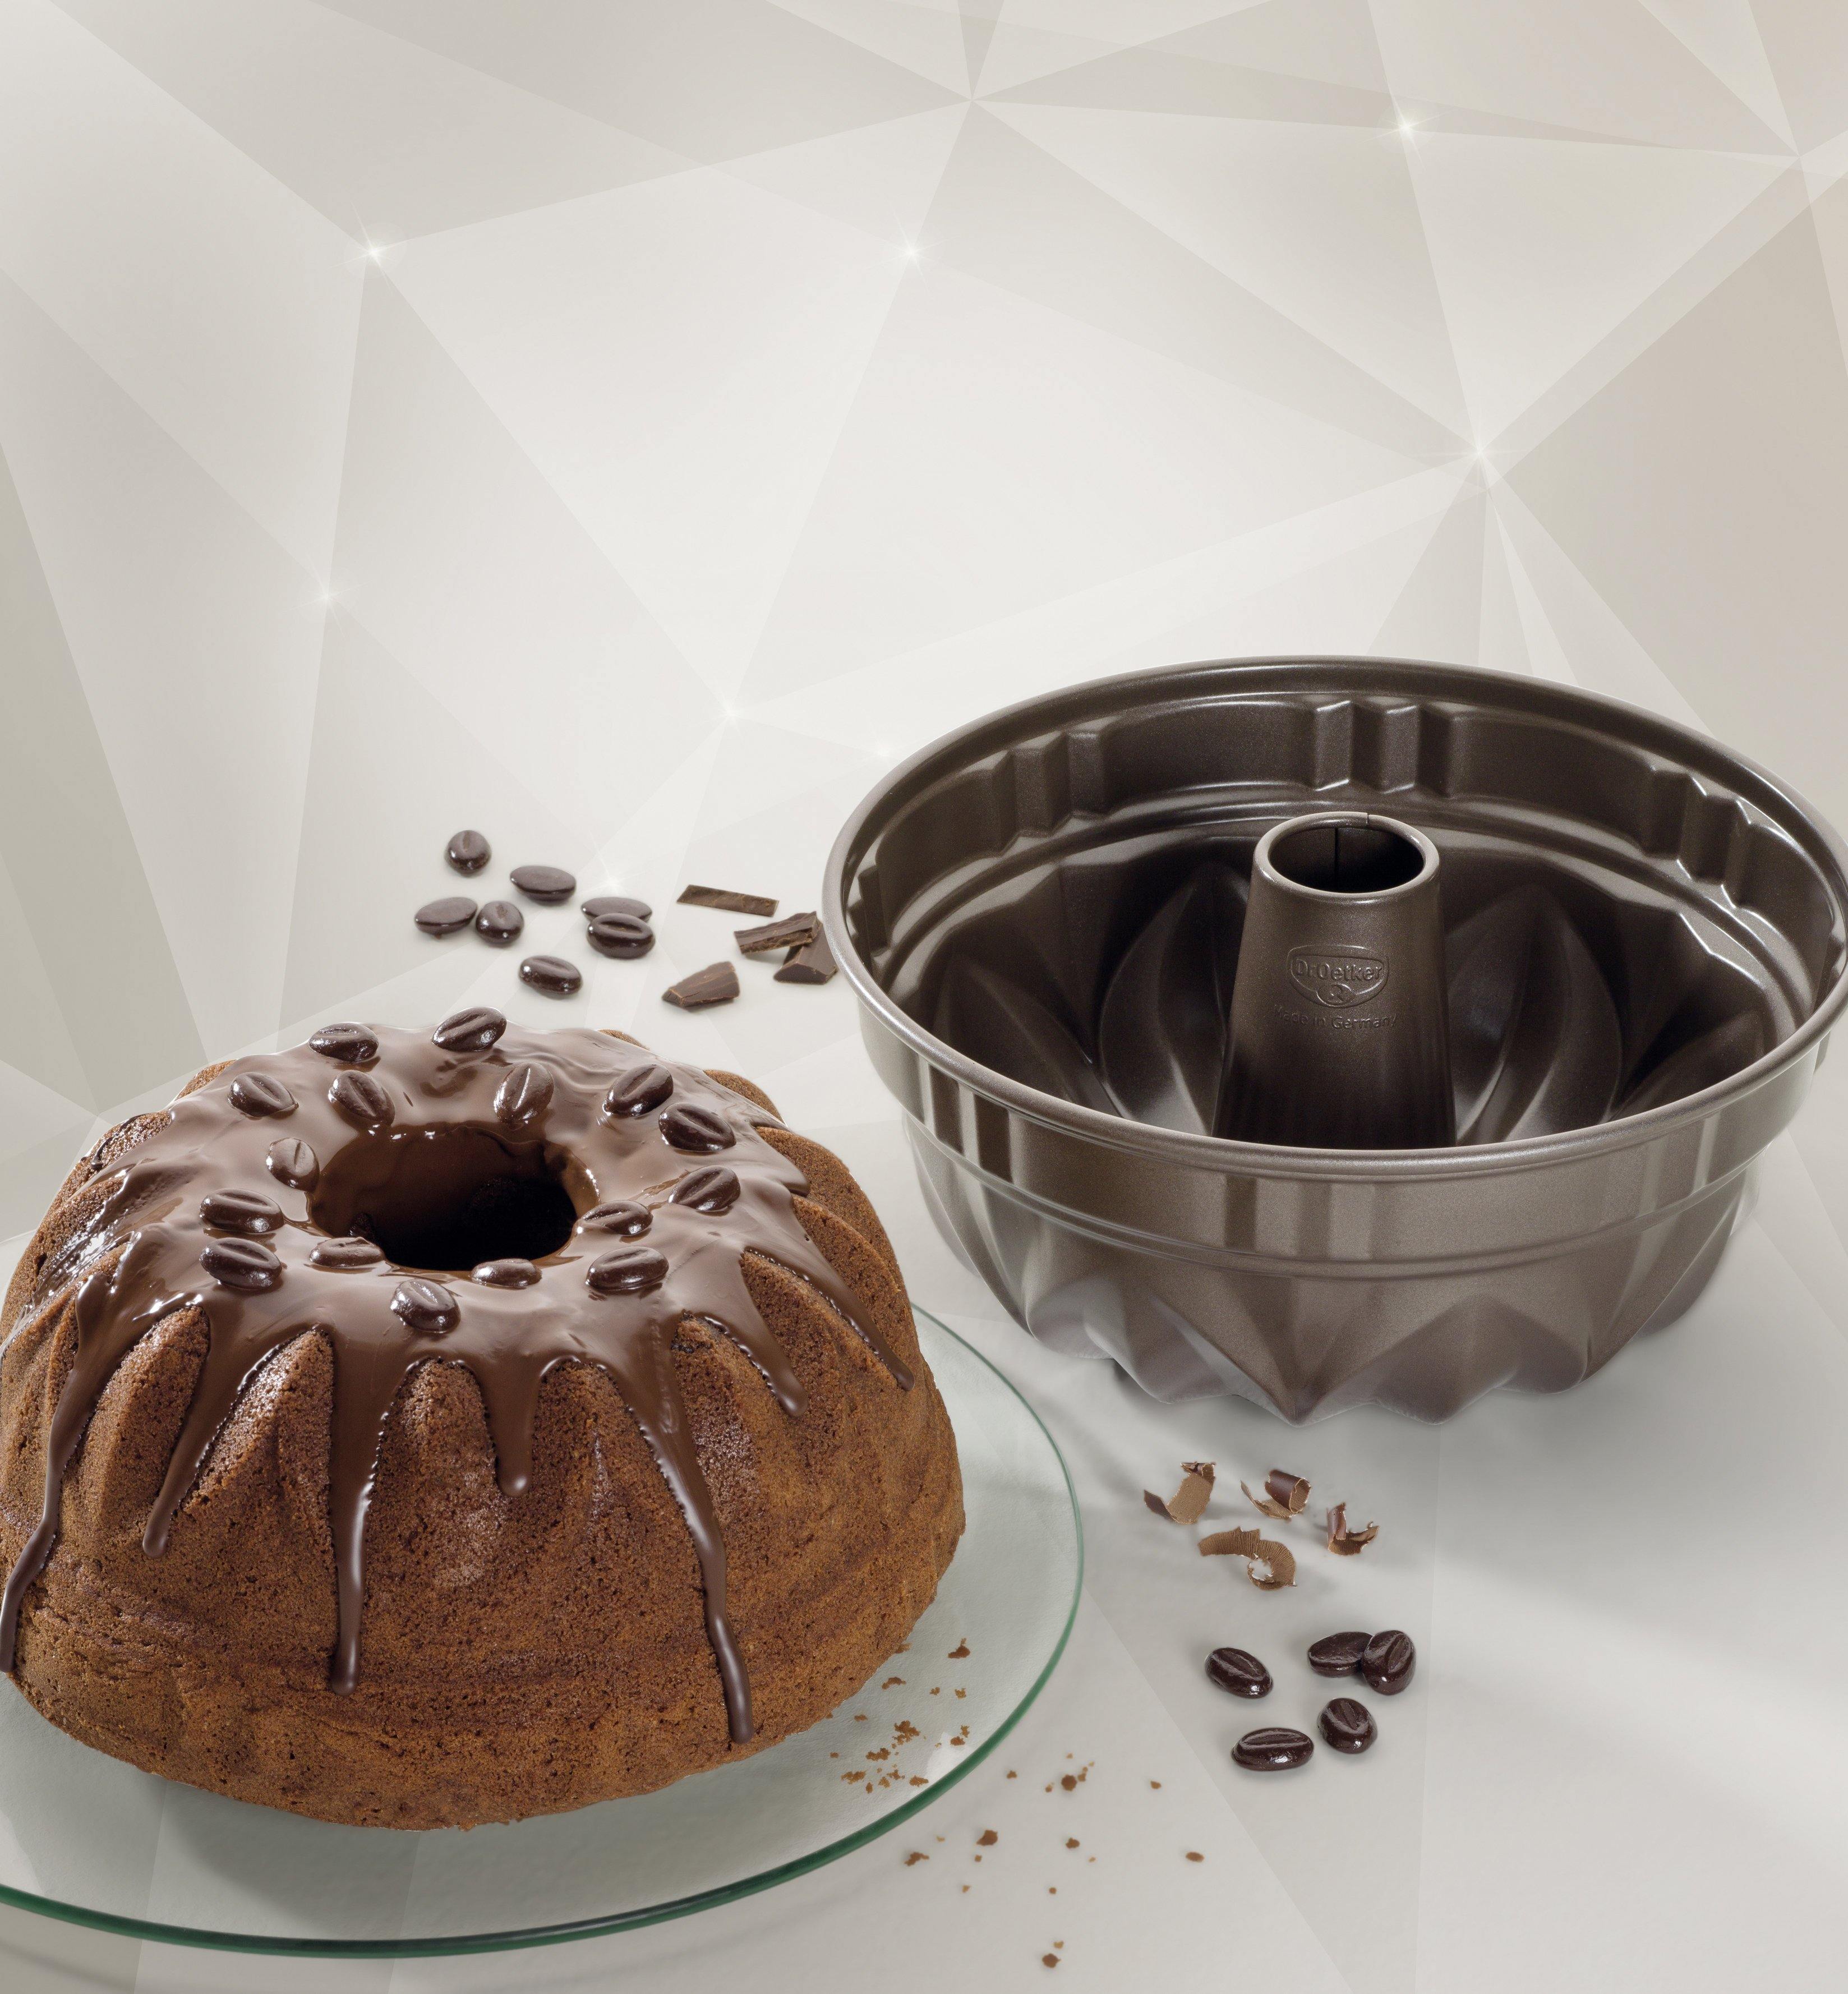 Dr. Oetker "Back-Edition" Special Edition Bundt Cake Mould, Brown, 25X12 Cm - Whole and All